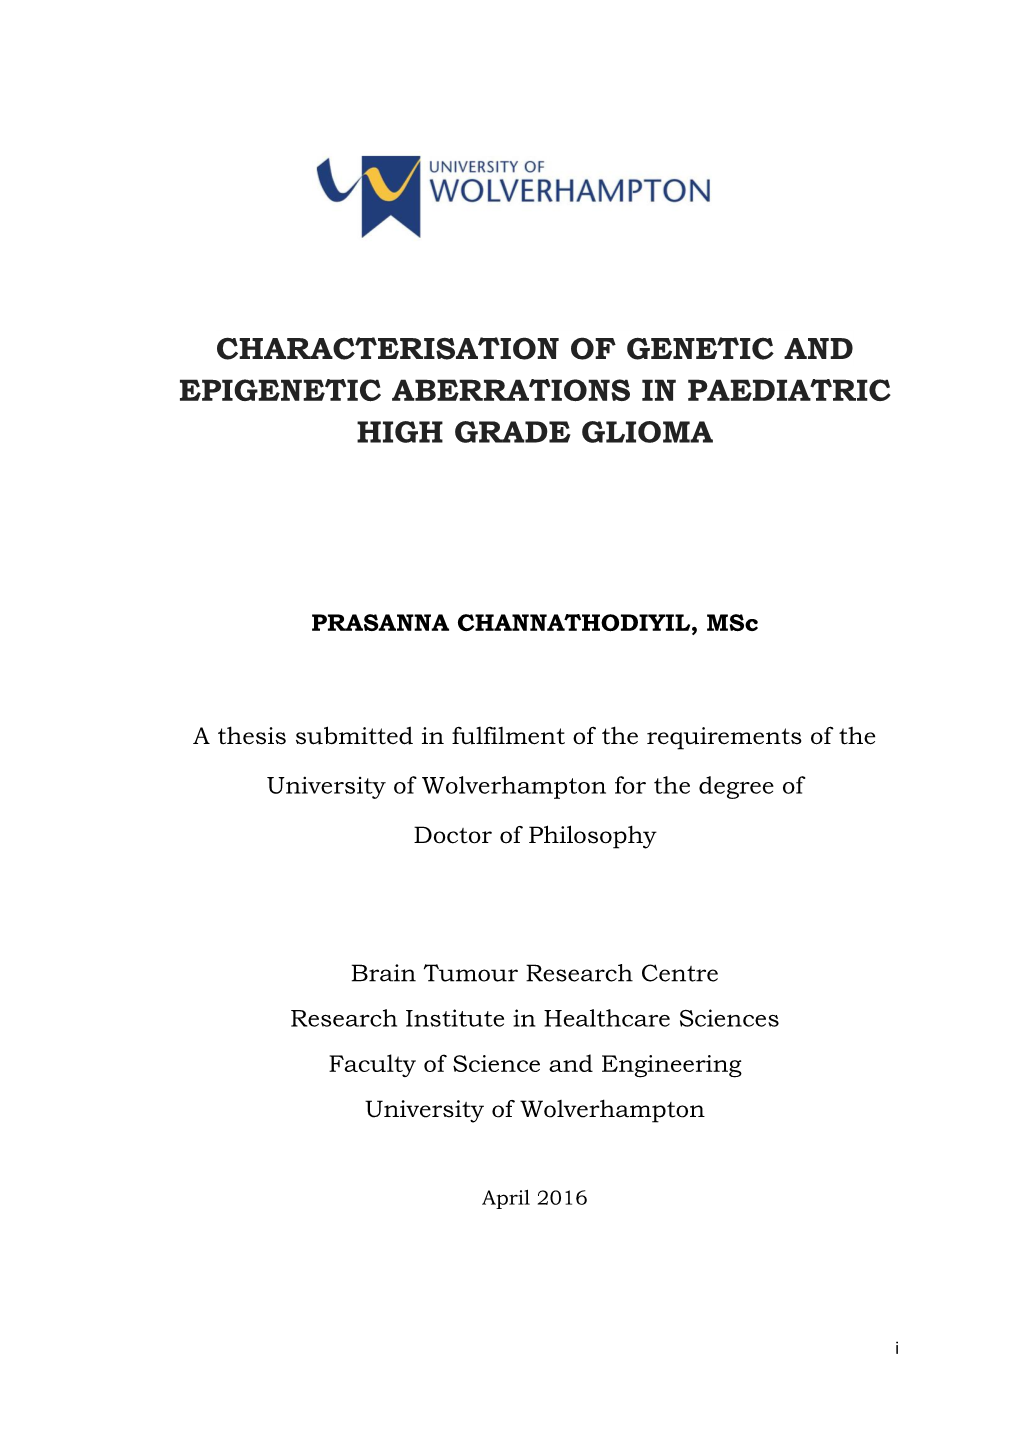 Characterisation of Genetic and Epigenetic Aberrations in Paediatric High Grade Glioma